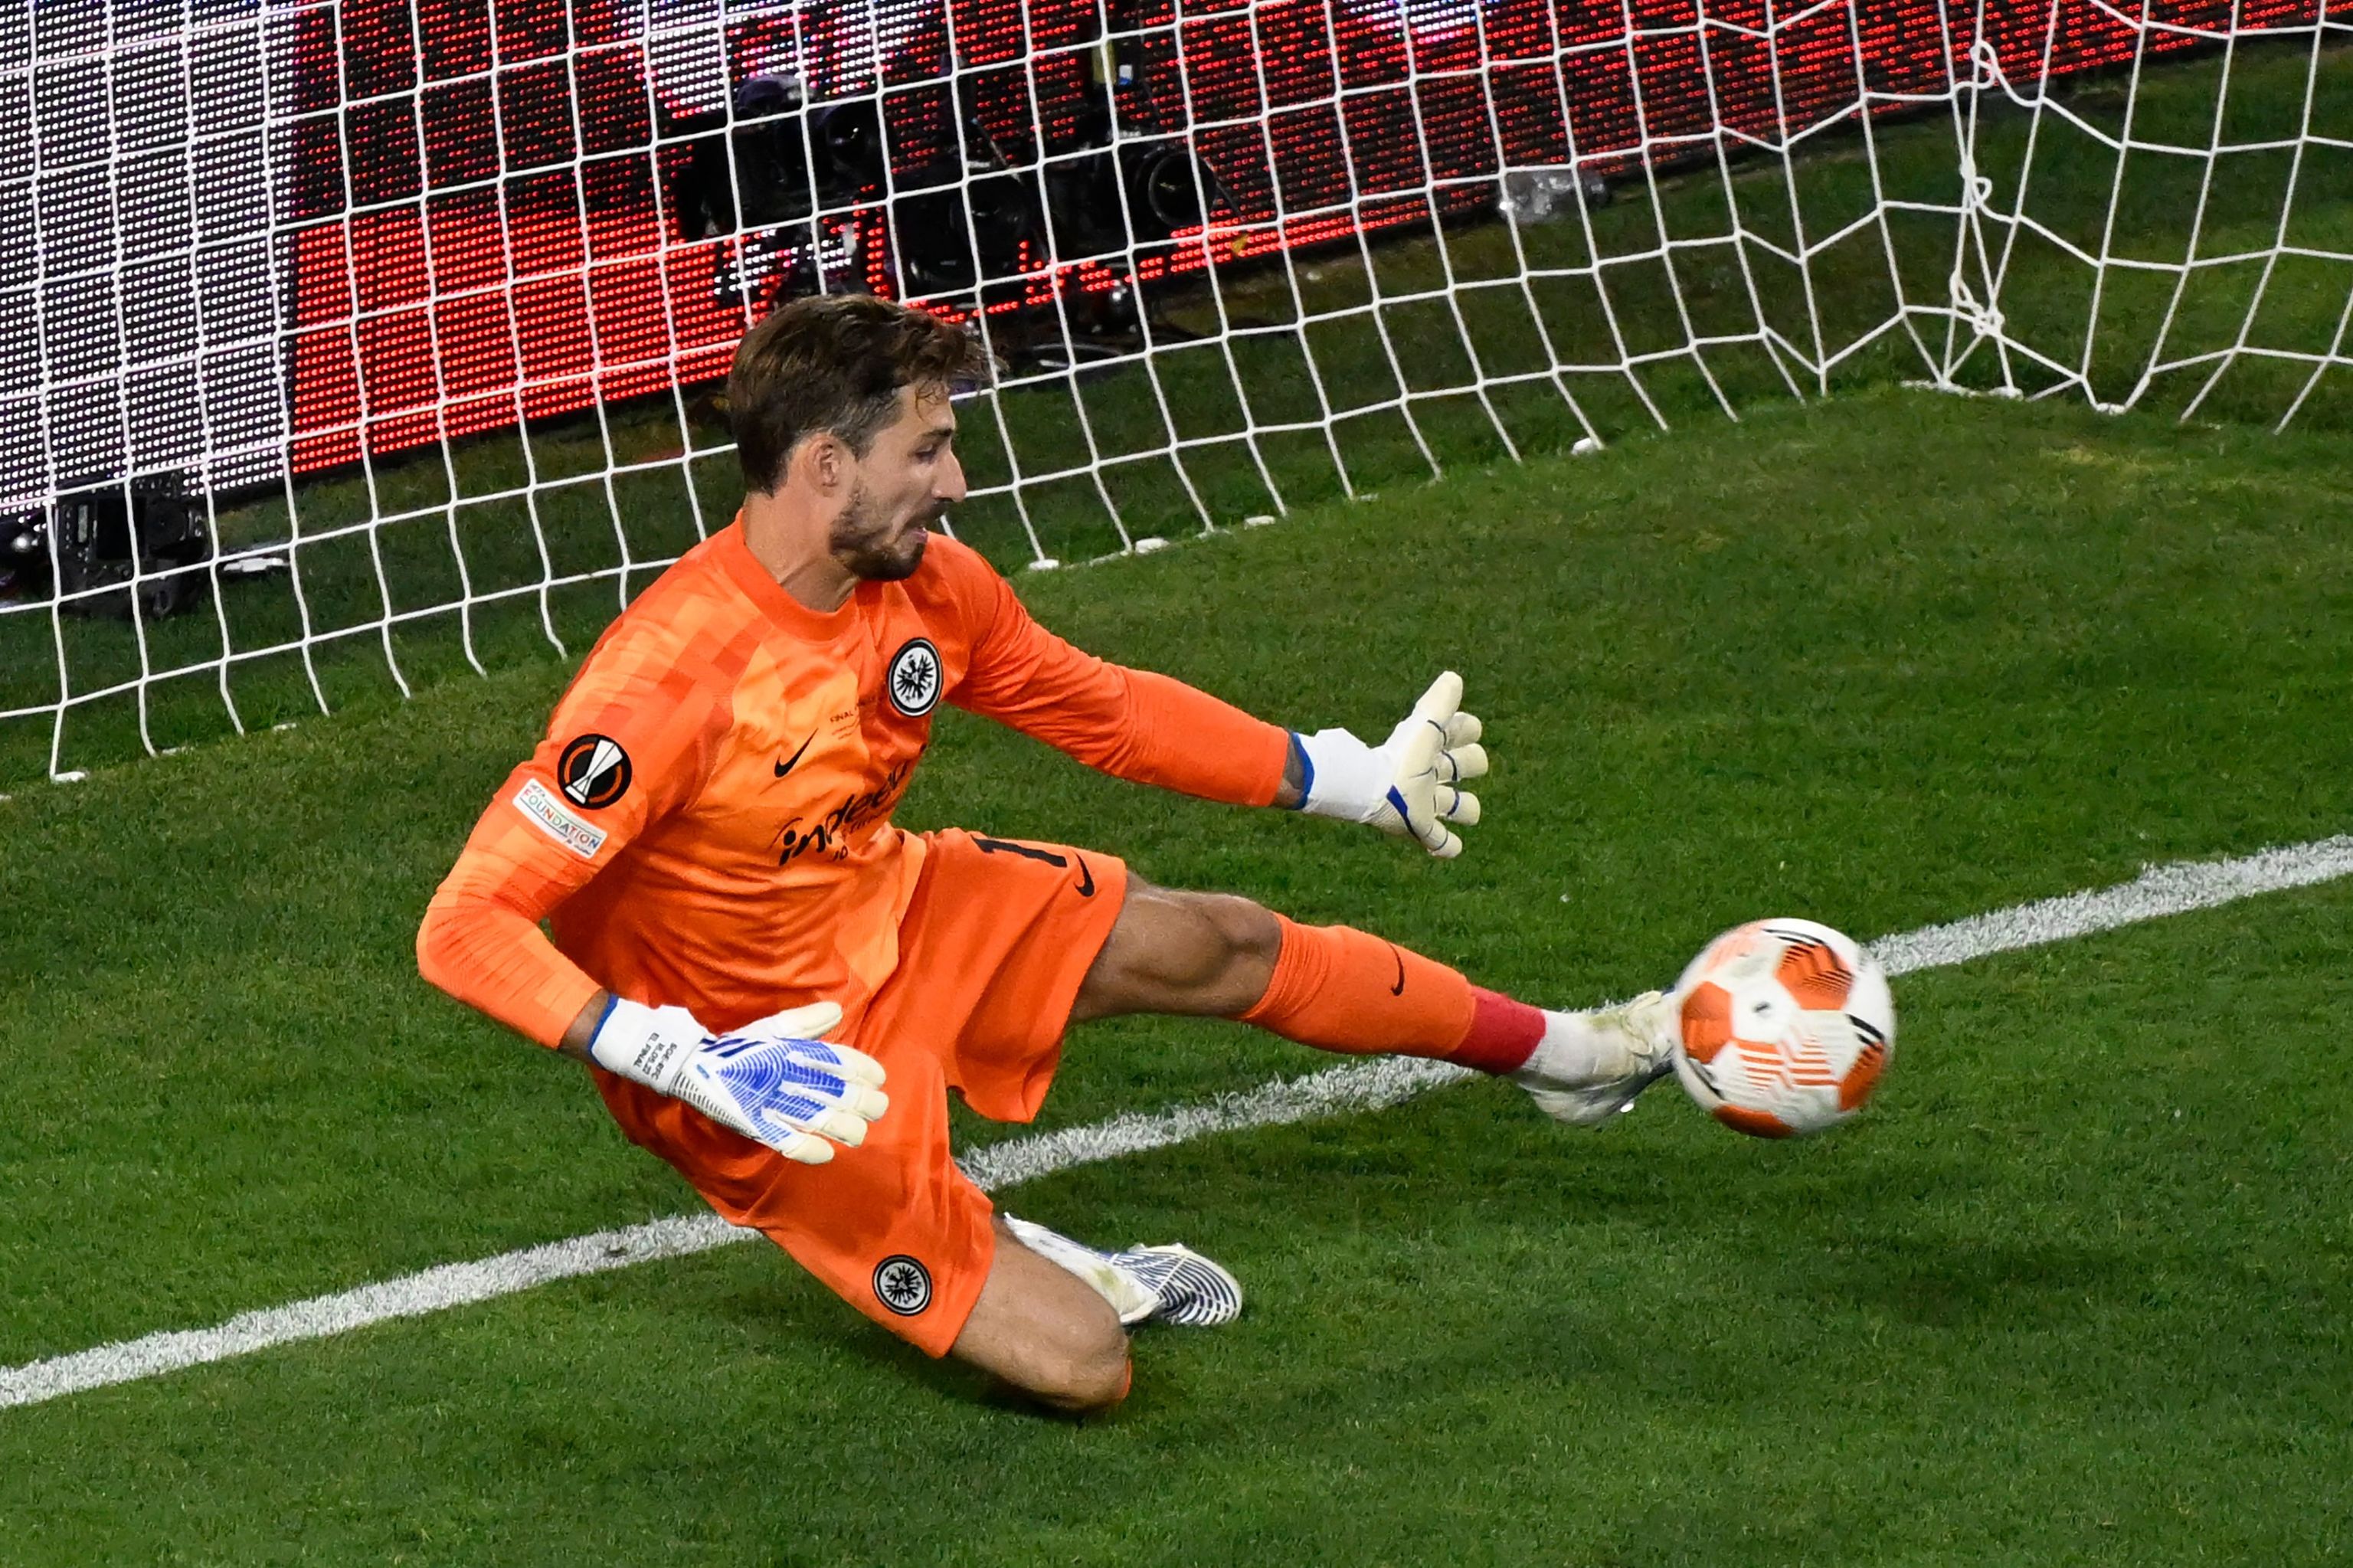 The Eintracht trap goalkeeper saved Ramsey's shot in the shootout.